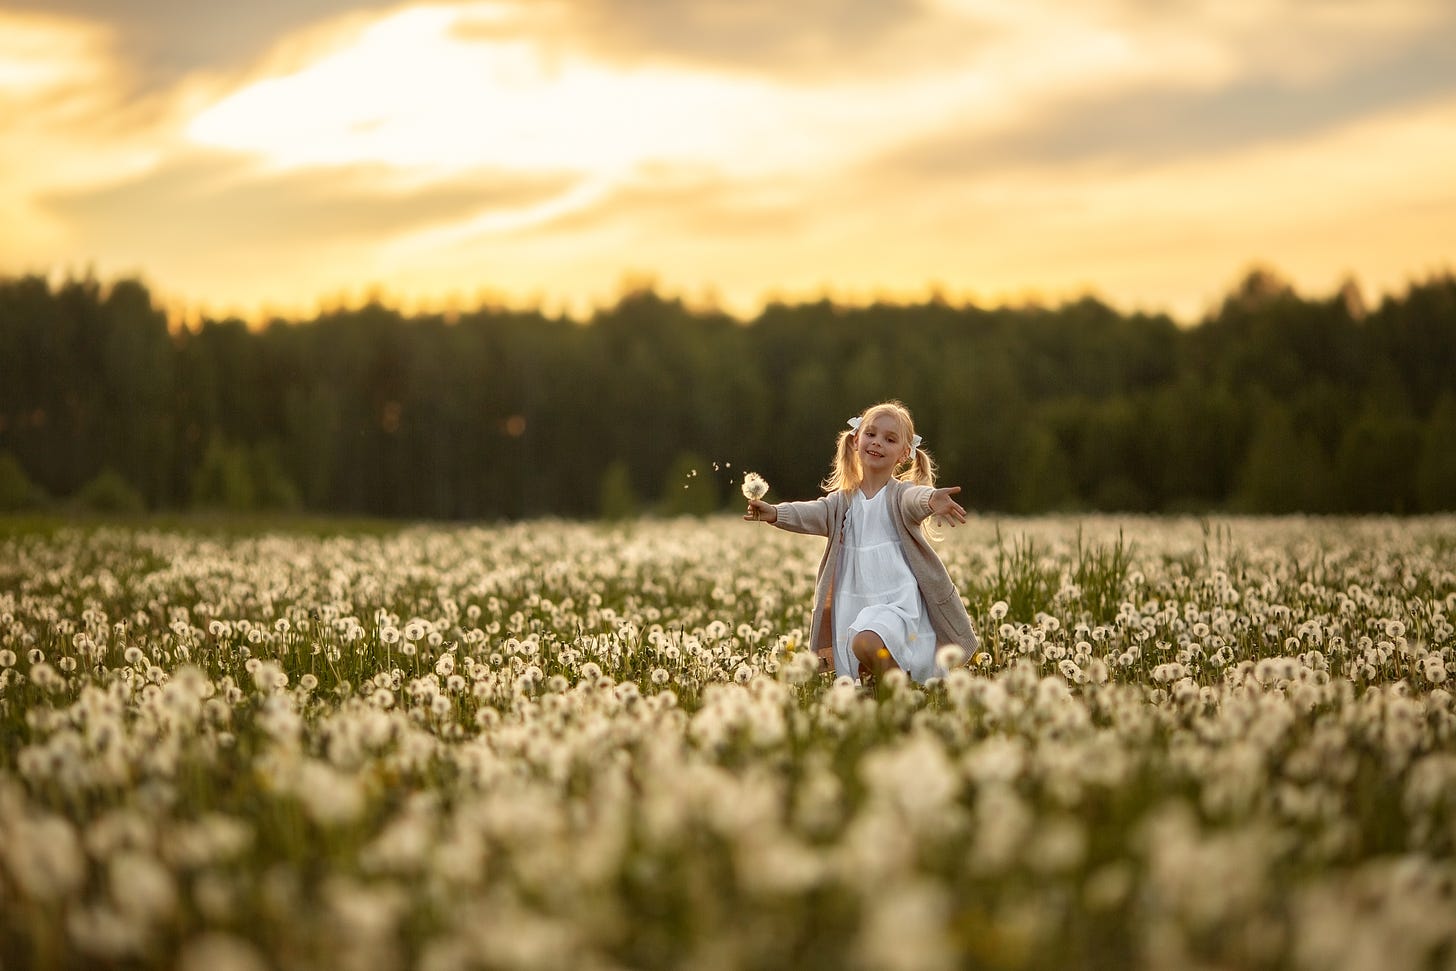 A young girl running through a field of dandelions